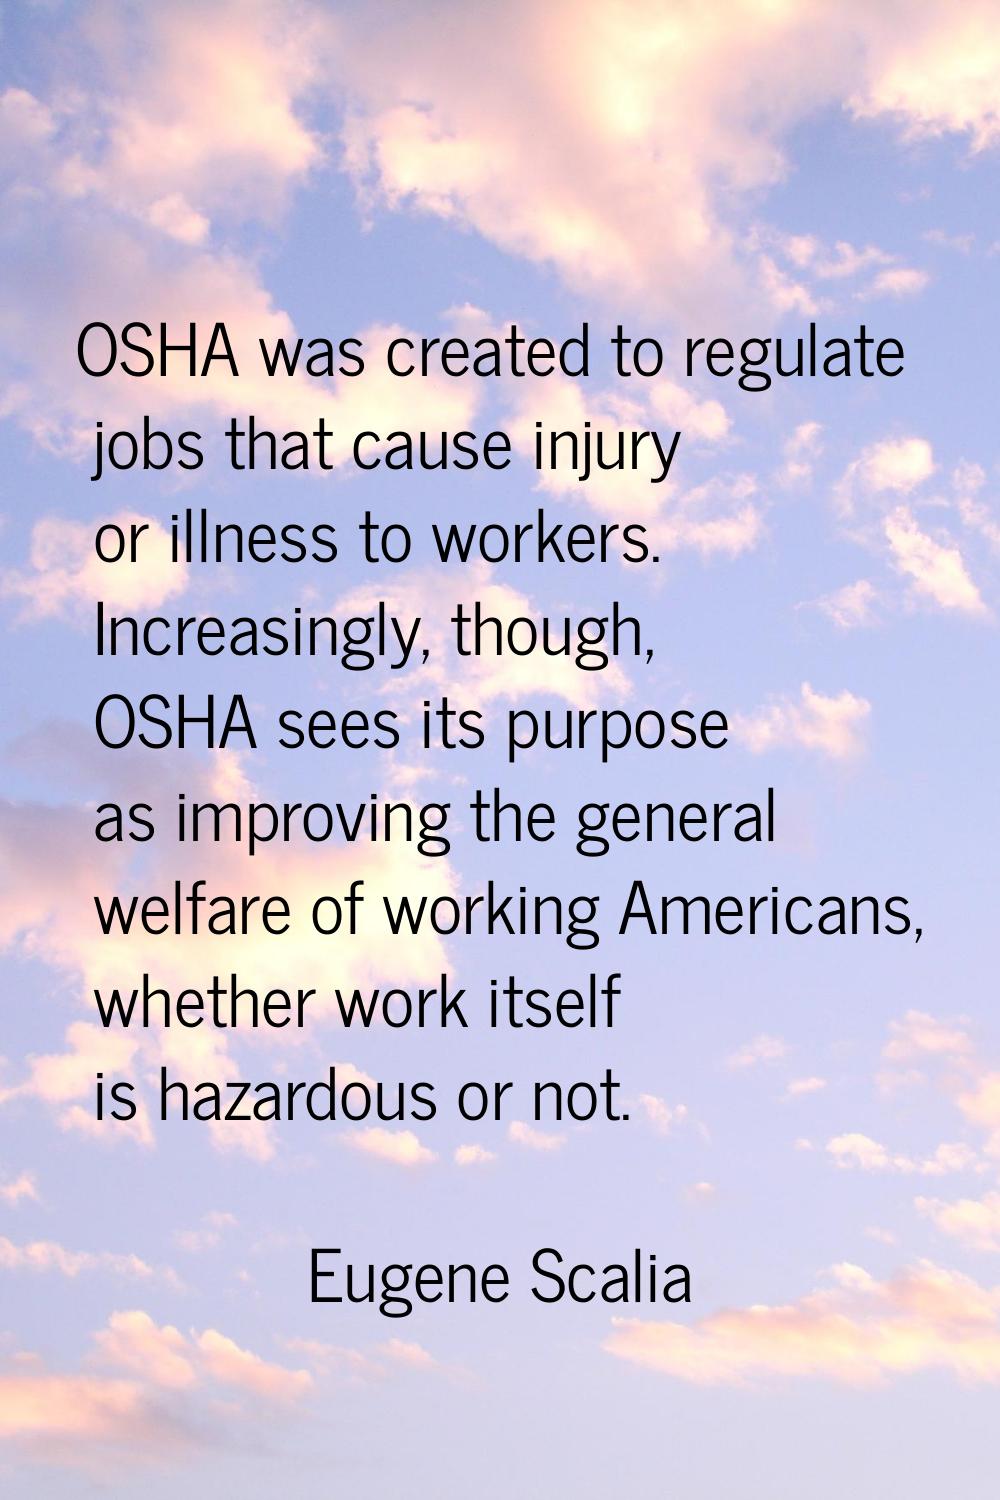 OSHA was created to regulate jobs that cause injury or illness to workers. Increasingly, though, OS